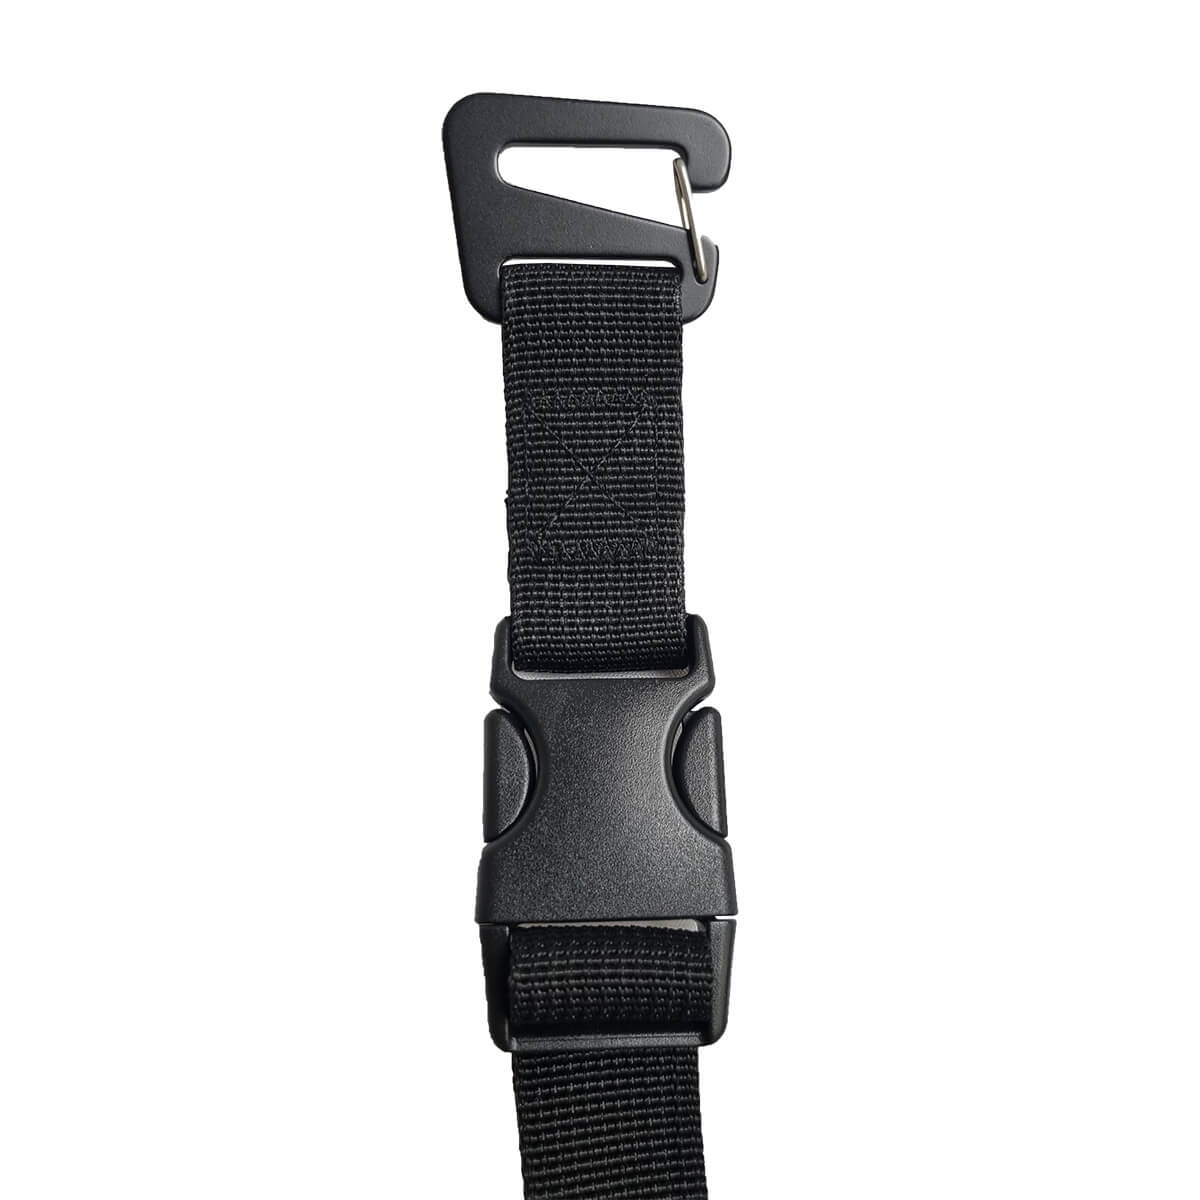 Easy-Release Buckle Tie-Down Straps